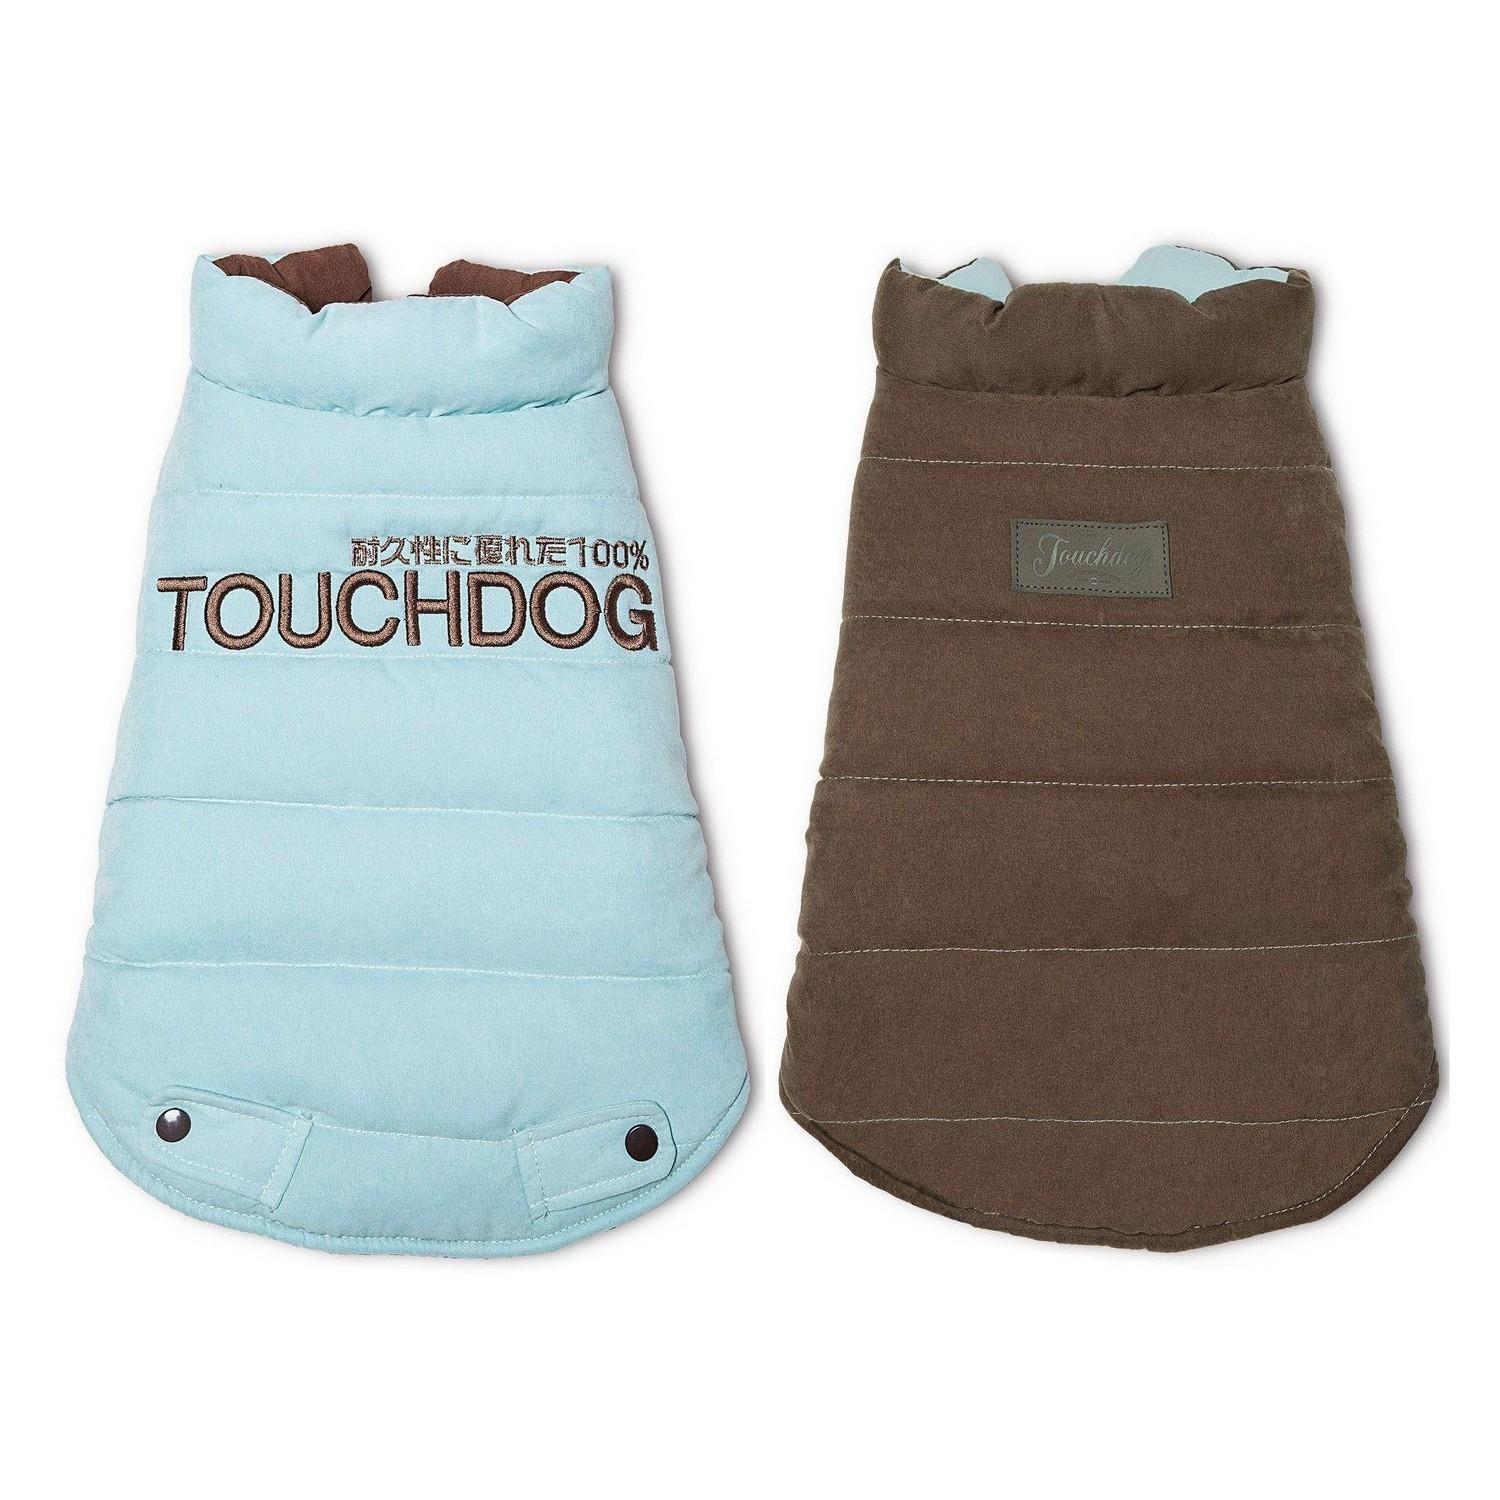 Pet Life Touchdog Waggin Swag Reversible Dog Coat - Blue/Brown